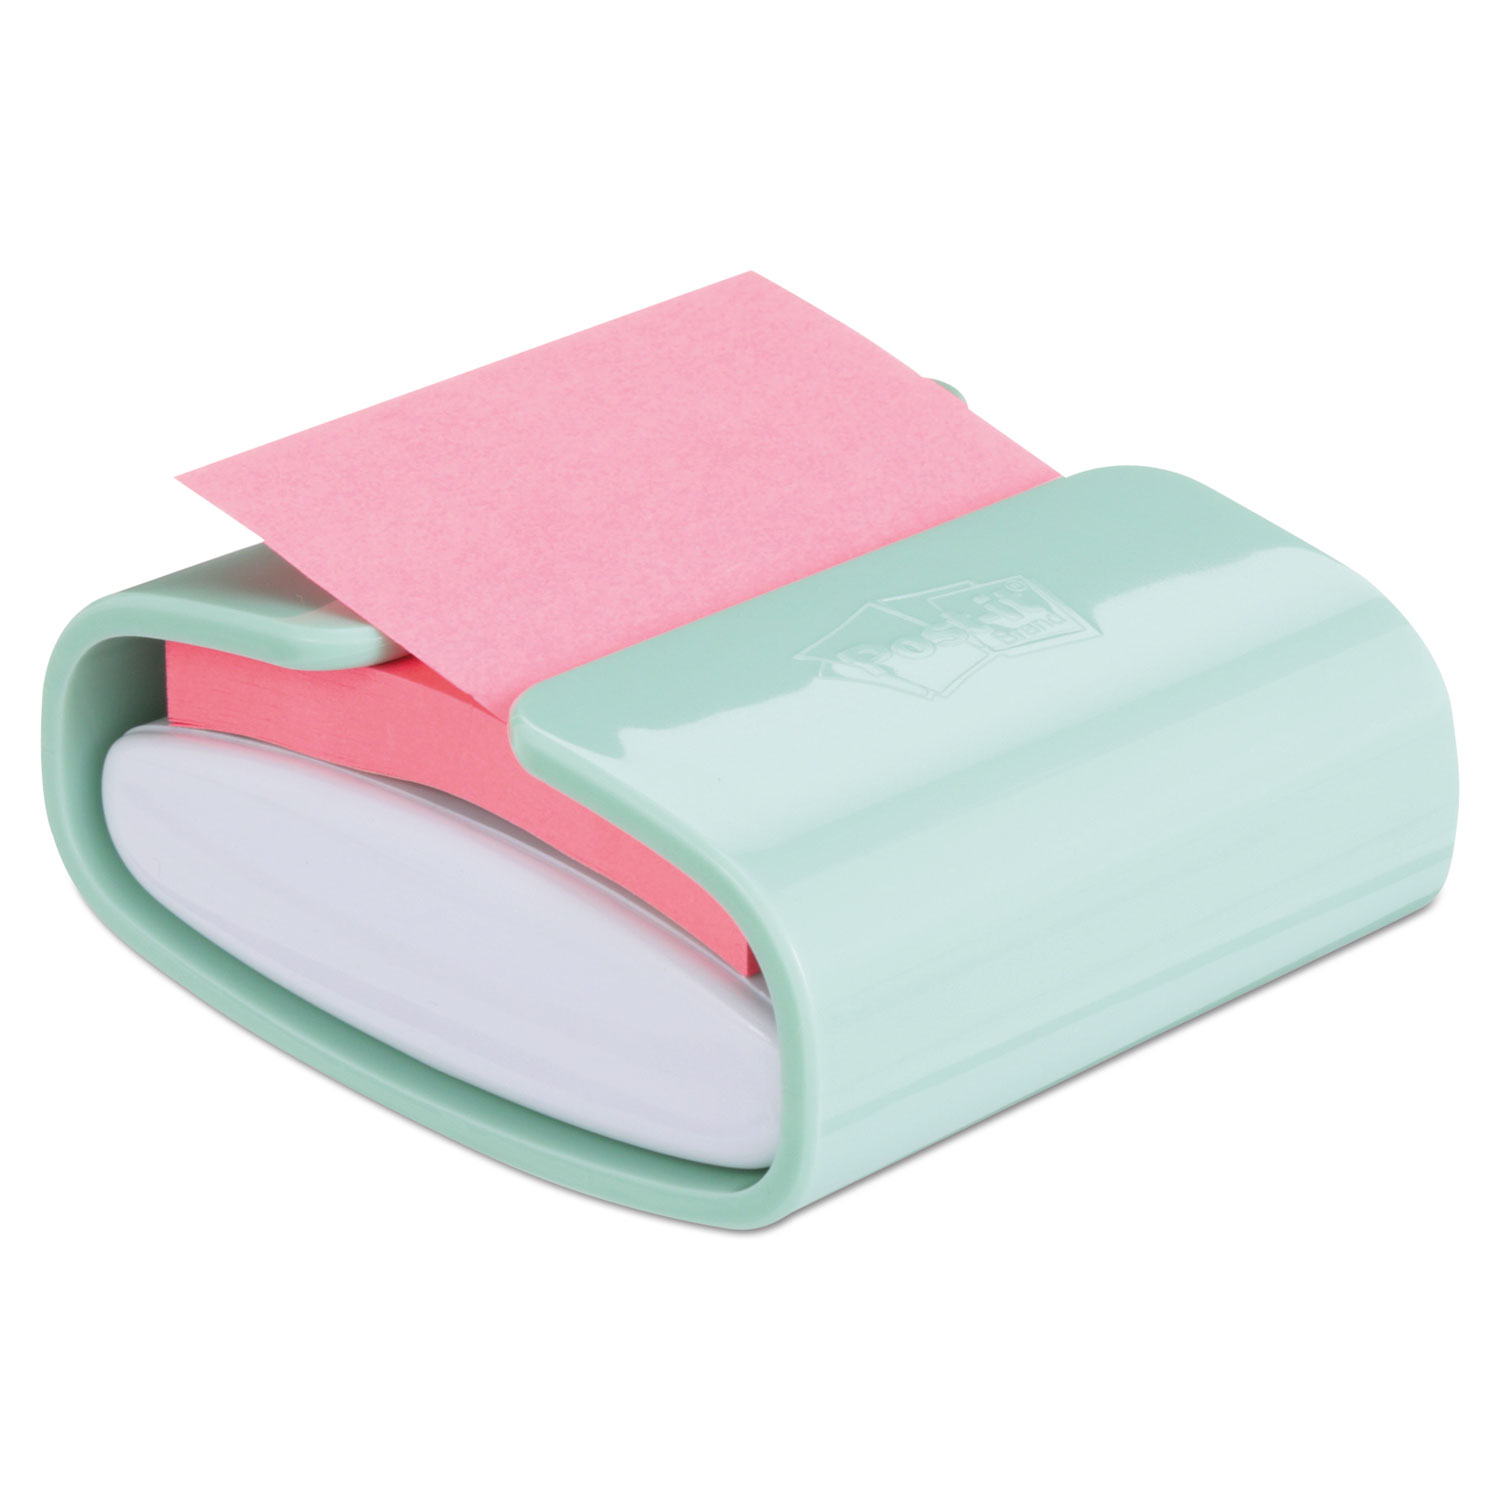  Post-it Pop-up Notes Super Sticky WD-330-COL-MT Wrap Dispenser, For 3 x 3 Pads, White/Mint (MMMWD330COLMT) 